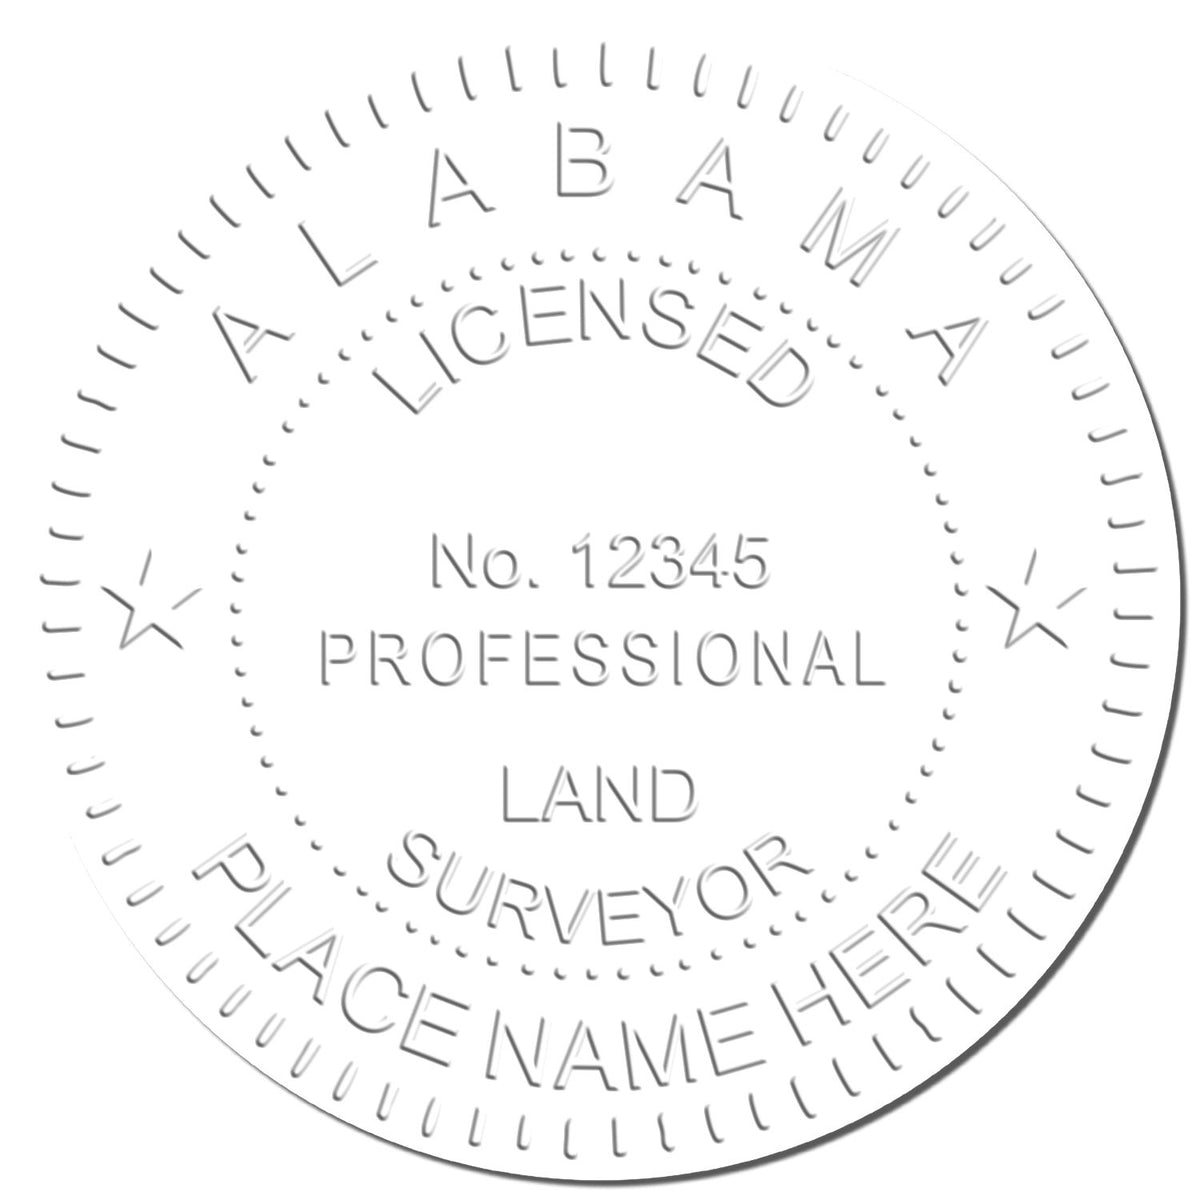 This paper is stamped with a sample imprint of the State of Alabama Soft Land Surveyor Embossing Seal, signifying its quality and reliability.